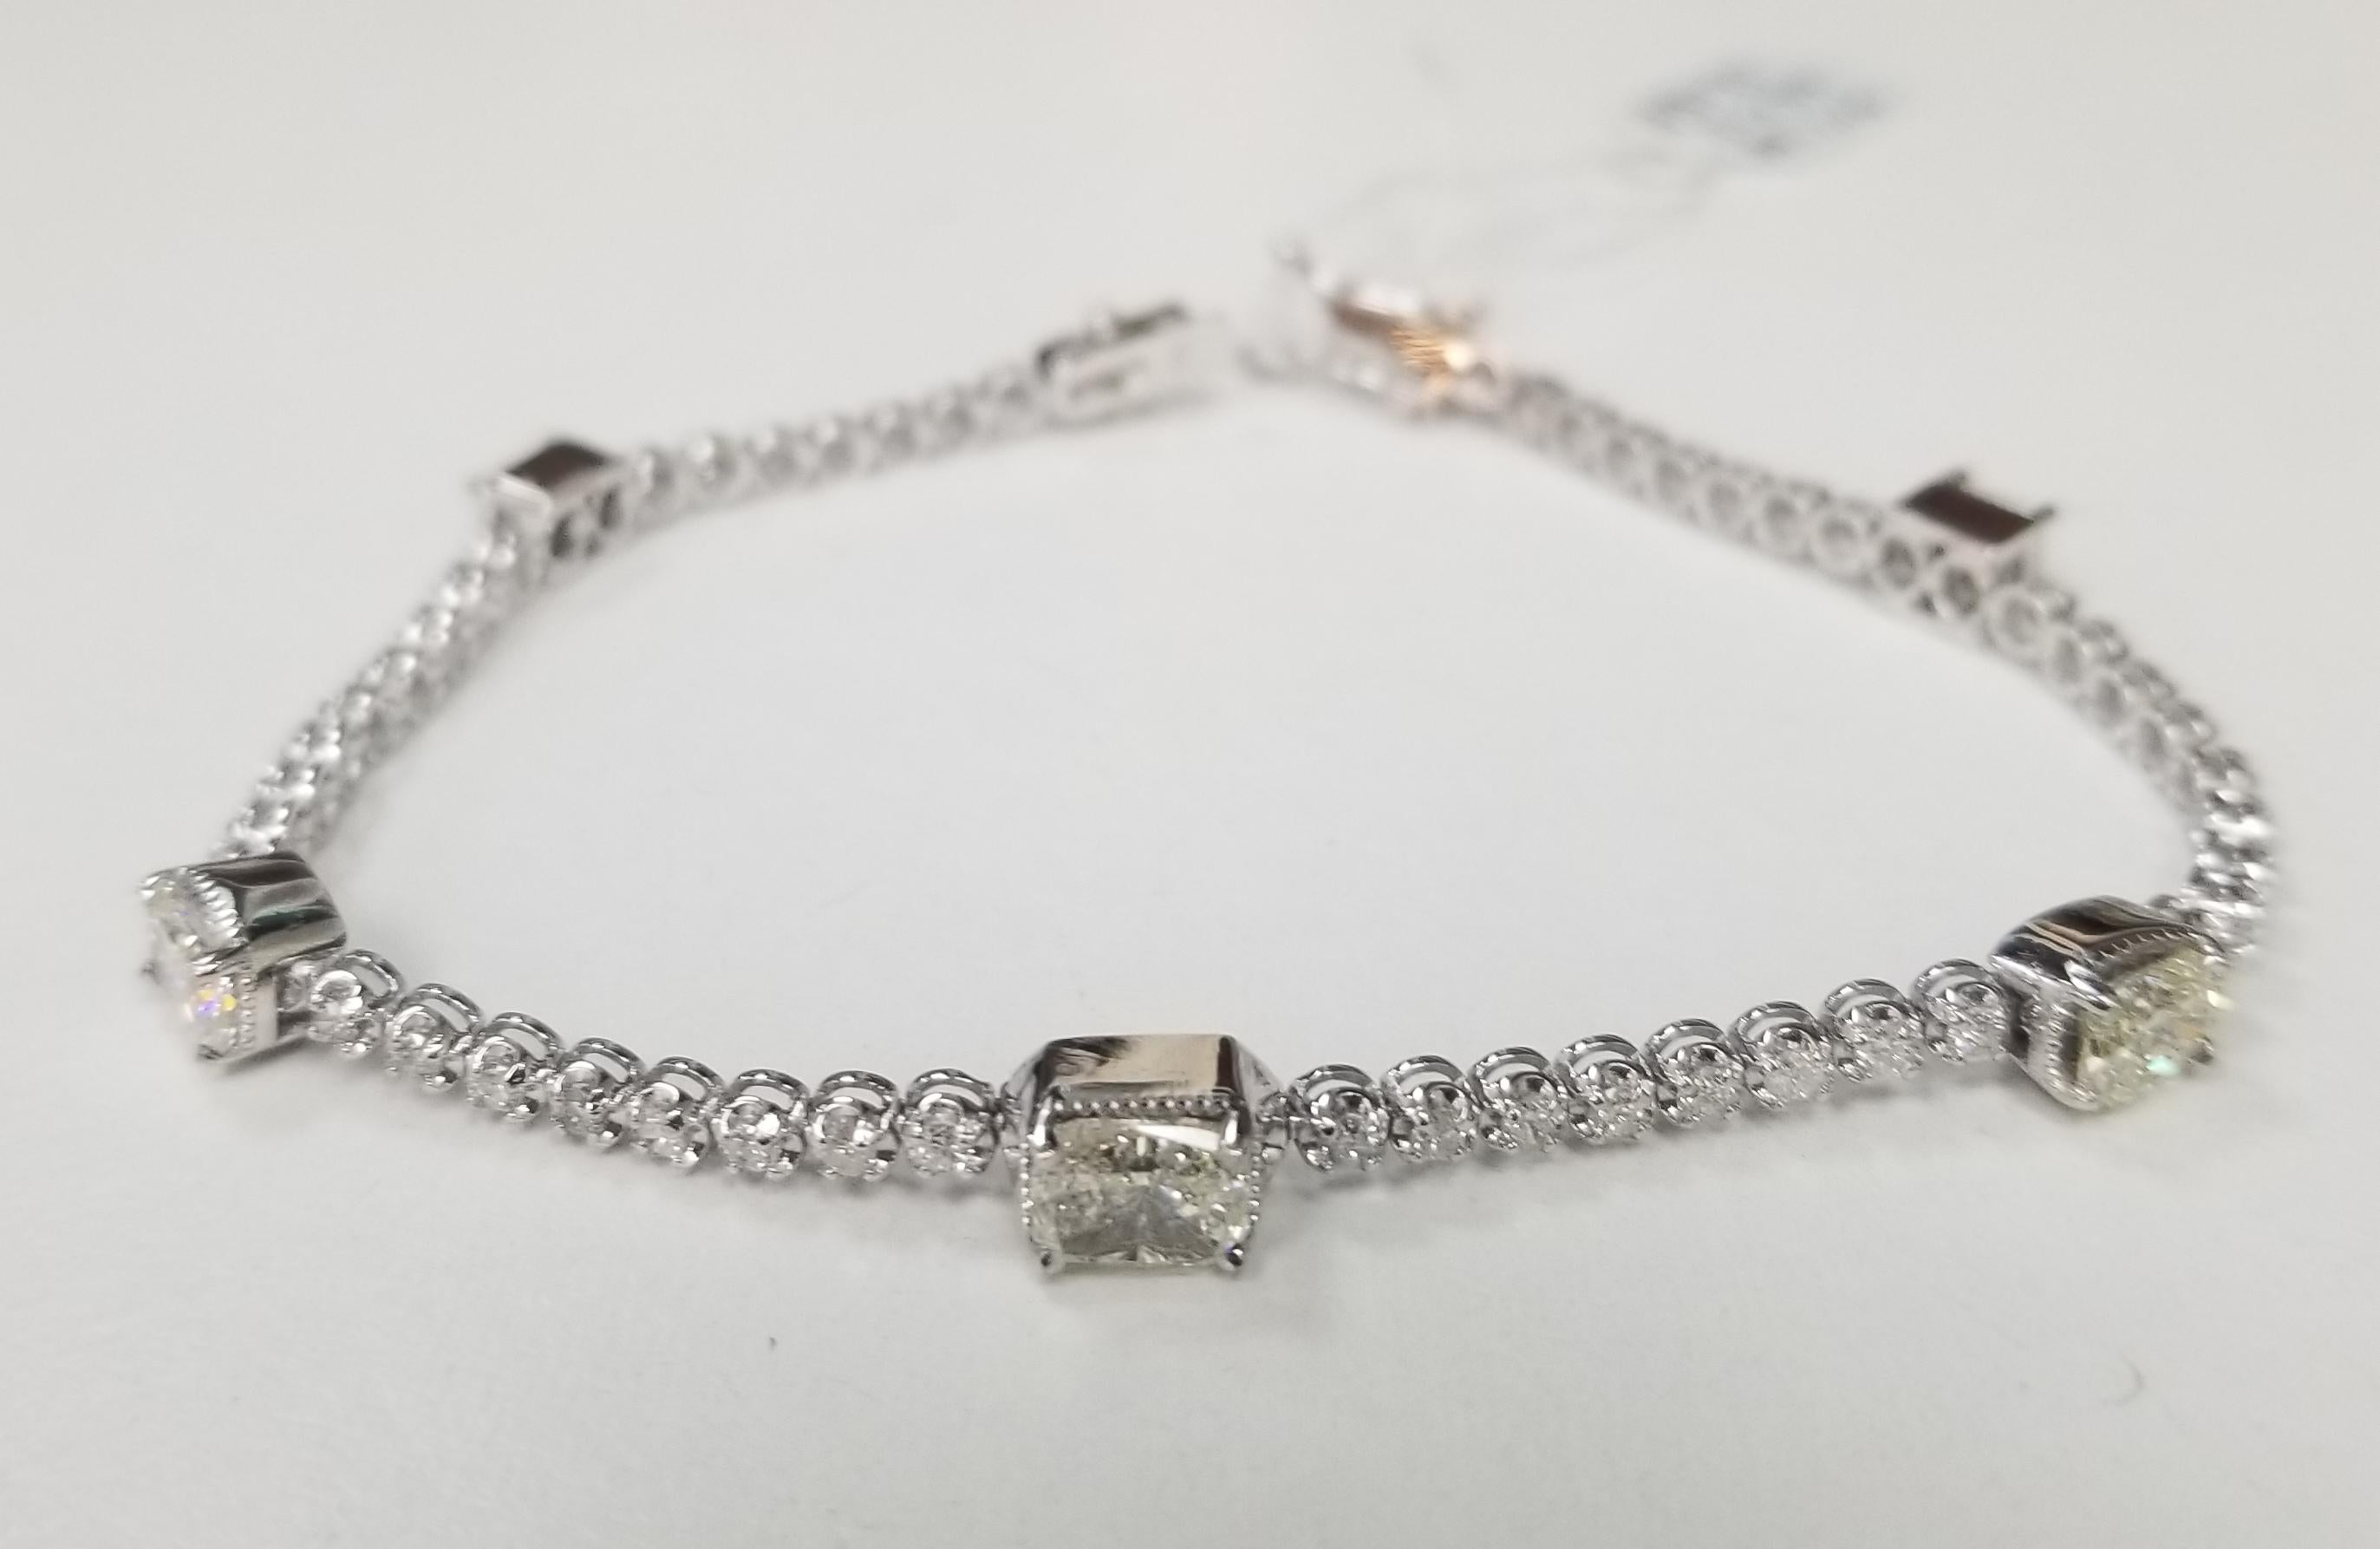 This is very beautiful 14k white gold custom made tennis bracelet with 5 fancy shape diamonds  and 51 round diamonds very fine quality diamonds, (Total weight 4.01cts.) bracelet measures 7 inches with clasp and double safety.
*Motivated to Sell –